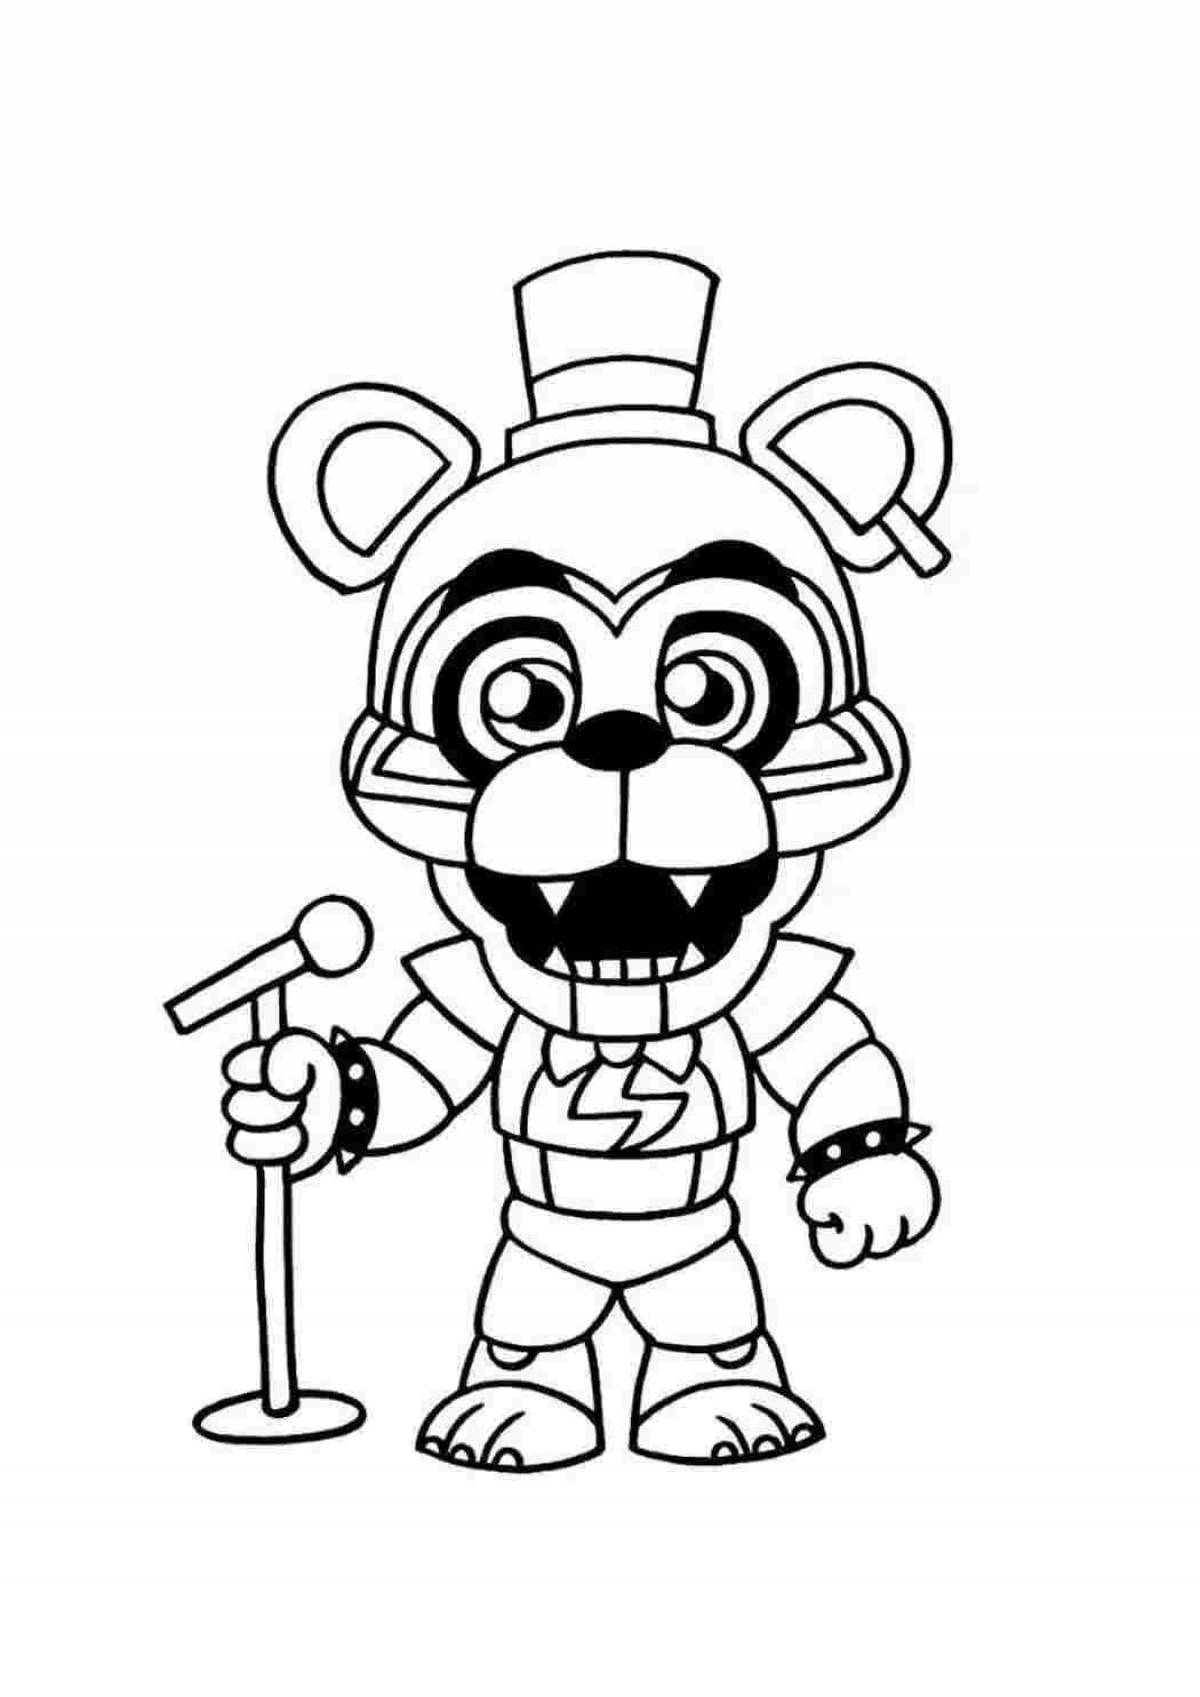 Lovely lefty animatronic coloring book